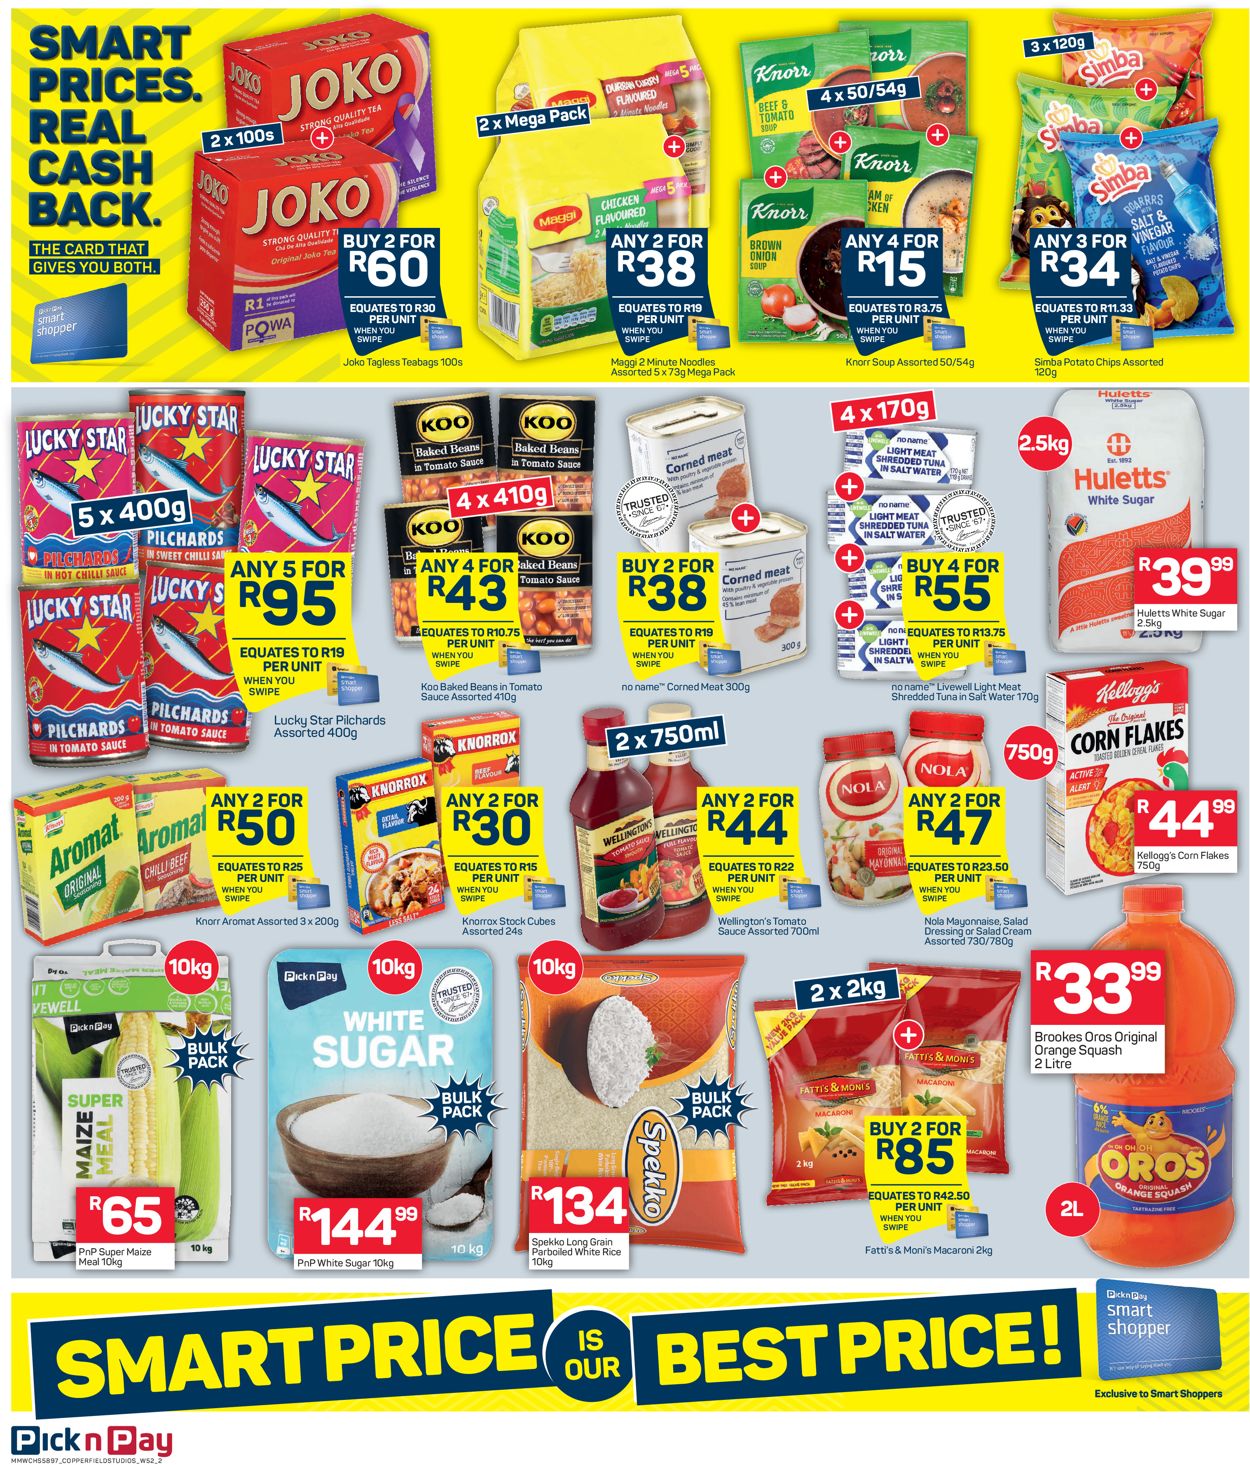 Pick n Pay Catalogue - 2021/02/26-2021/03/07 (Page 2)